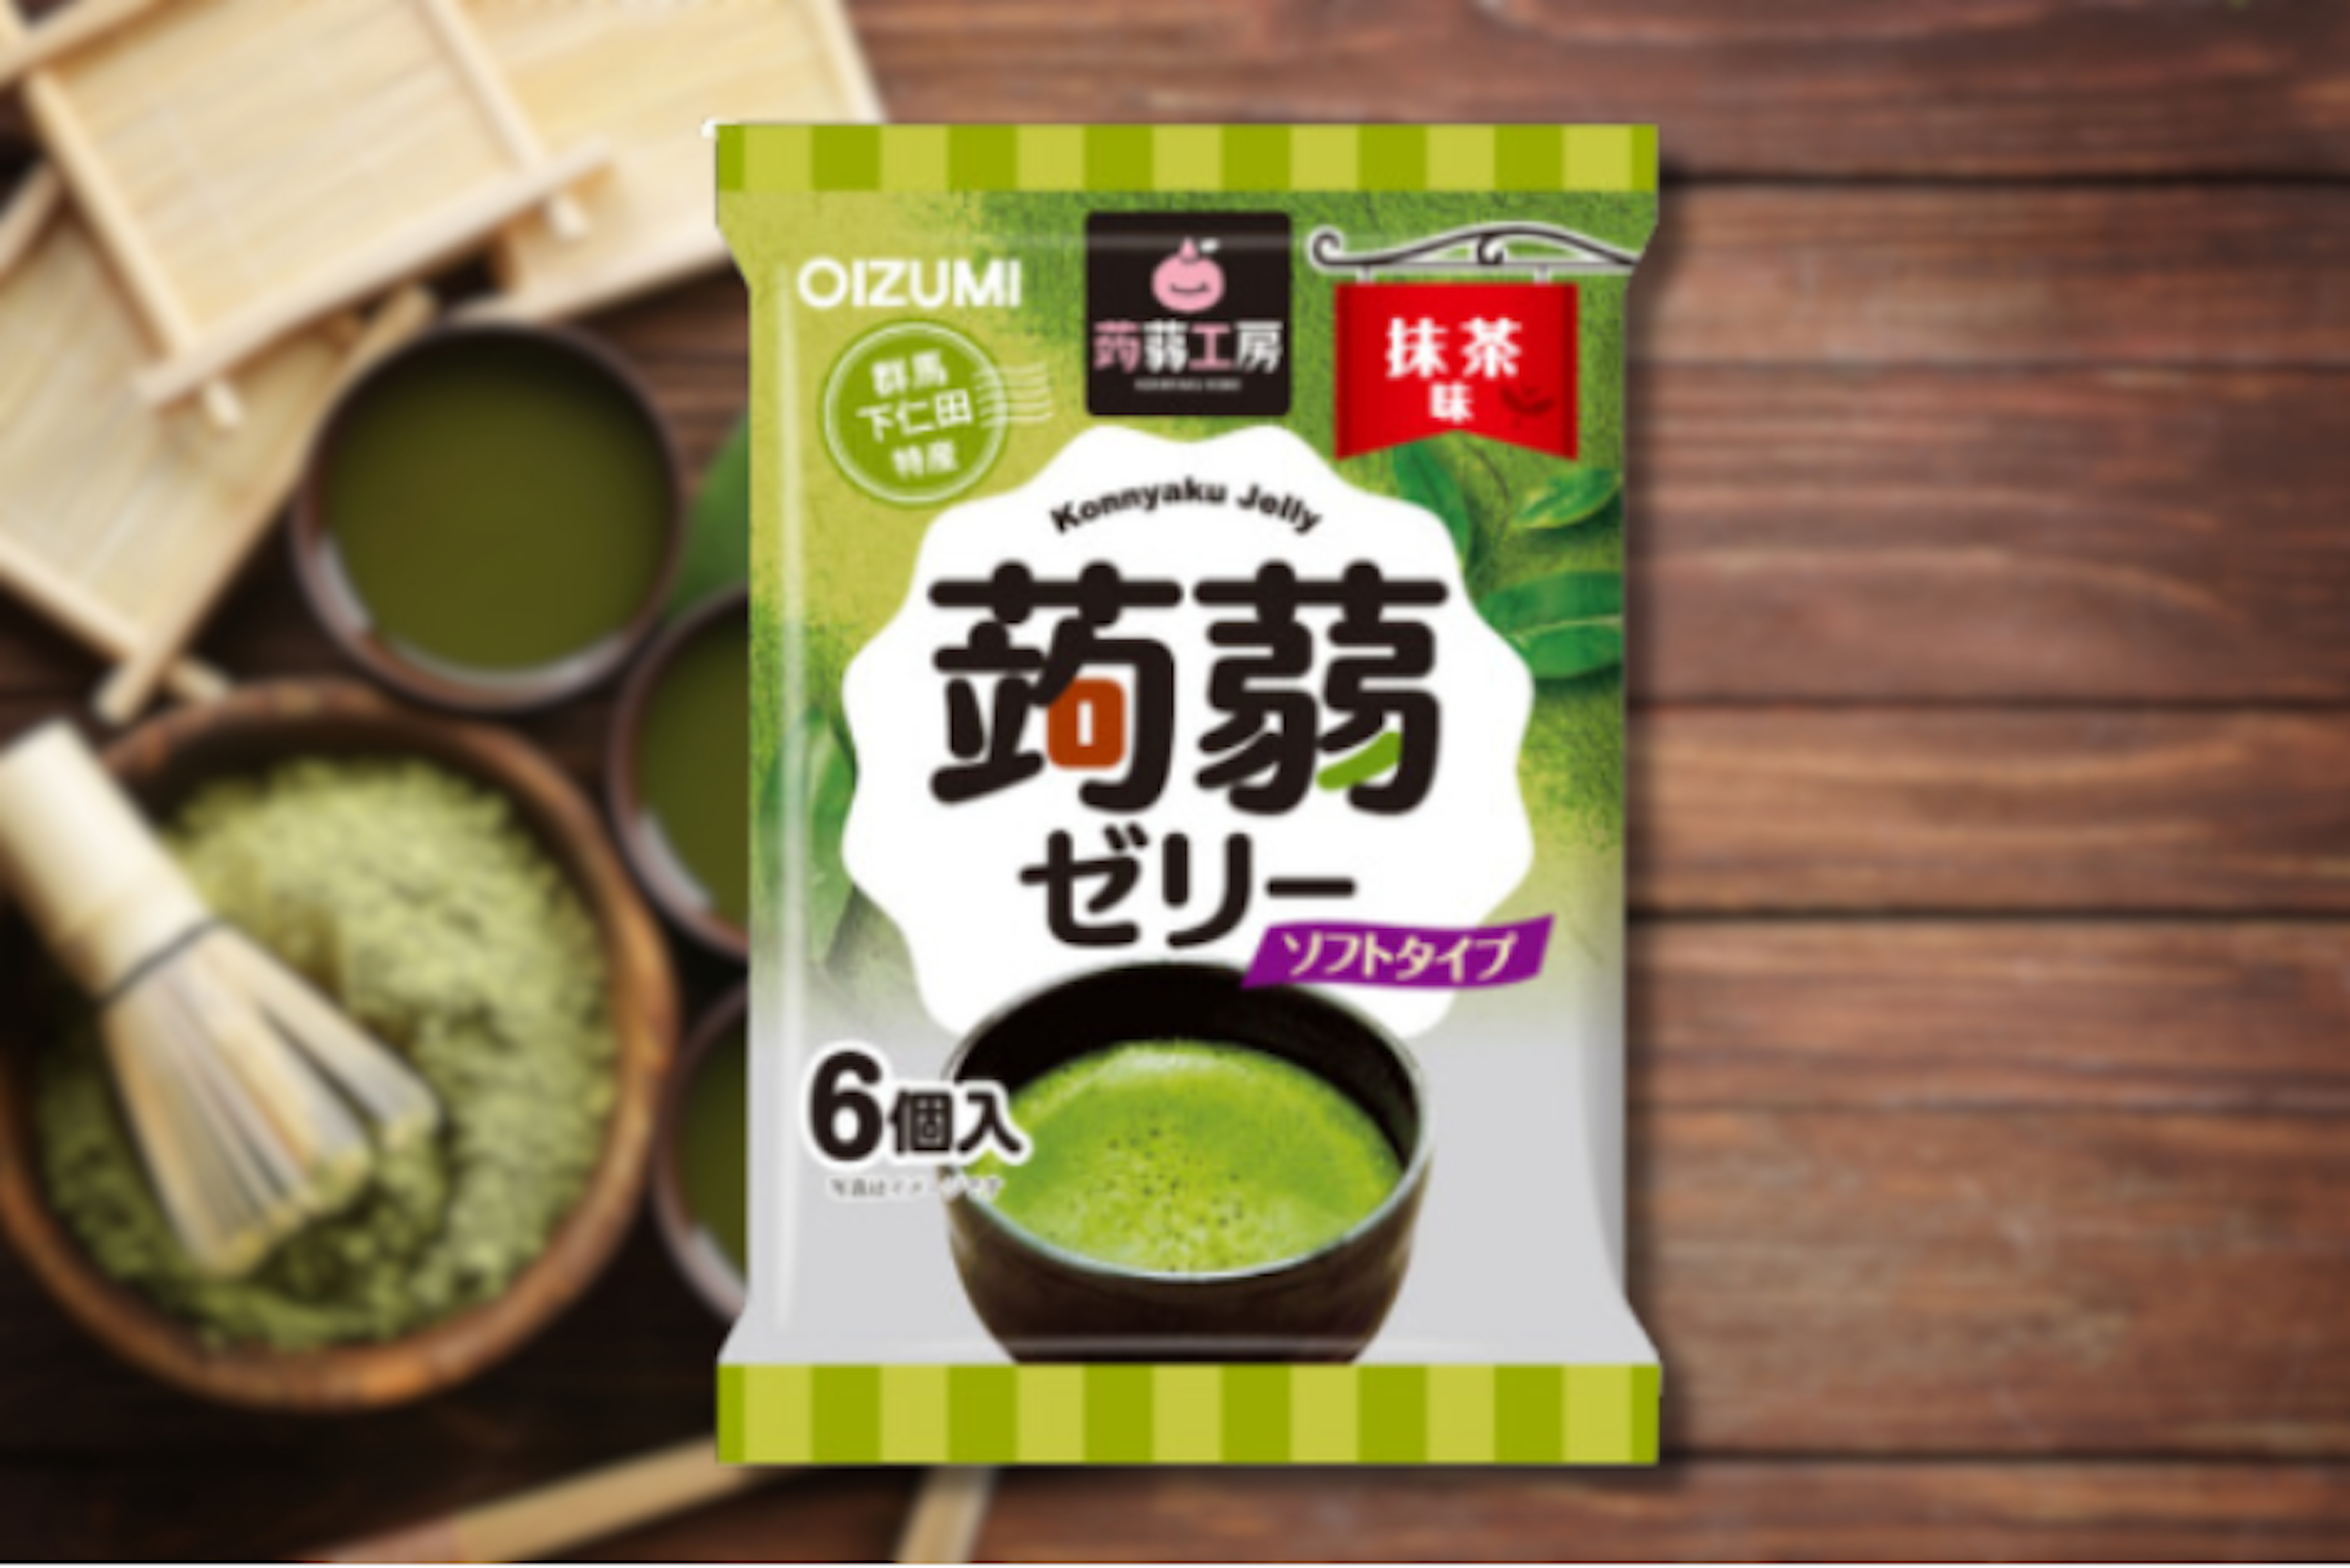 OIZUMI Konjac Jelly Matcha 106g - Low calorie and healthy snack